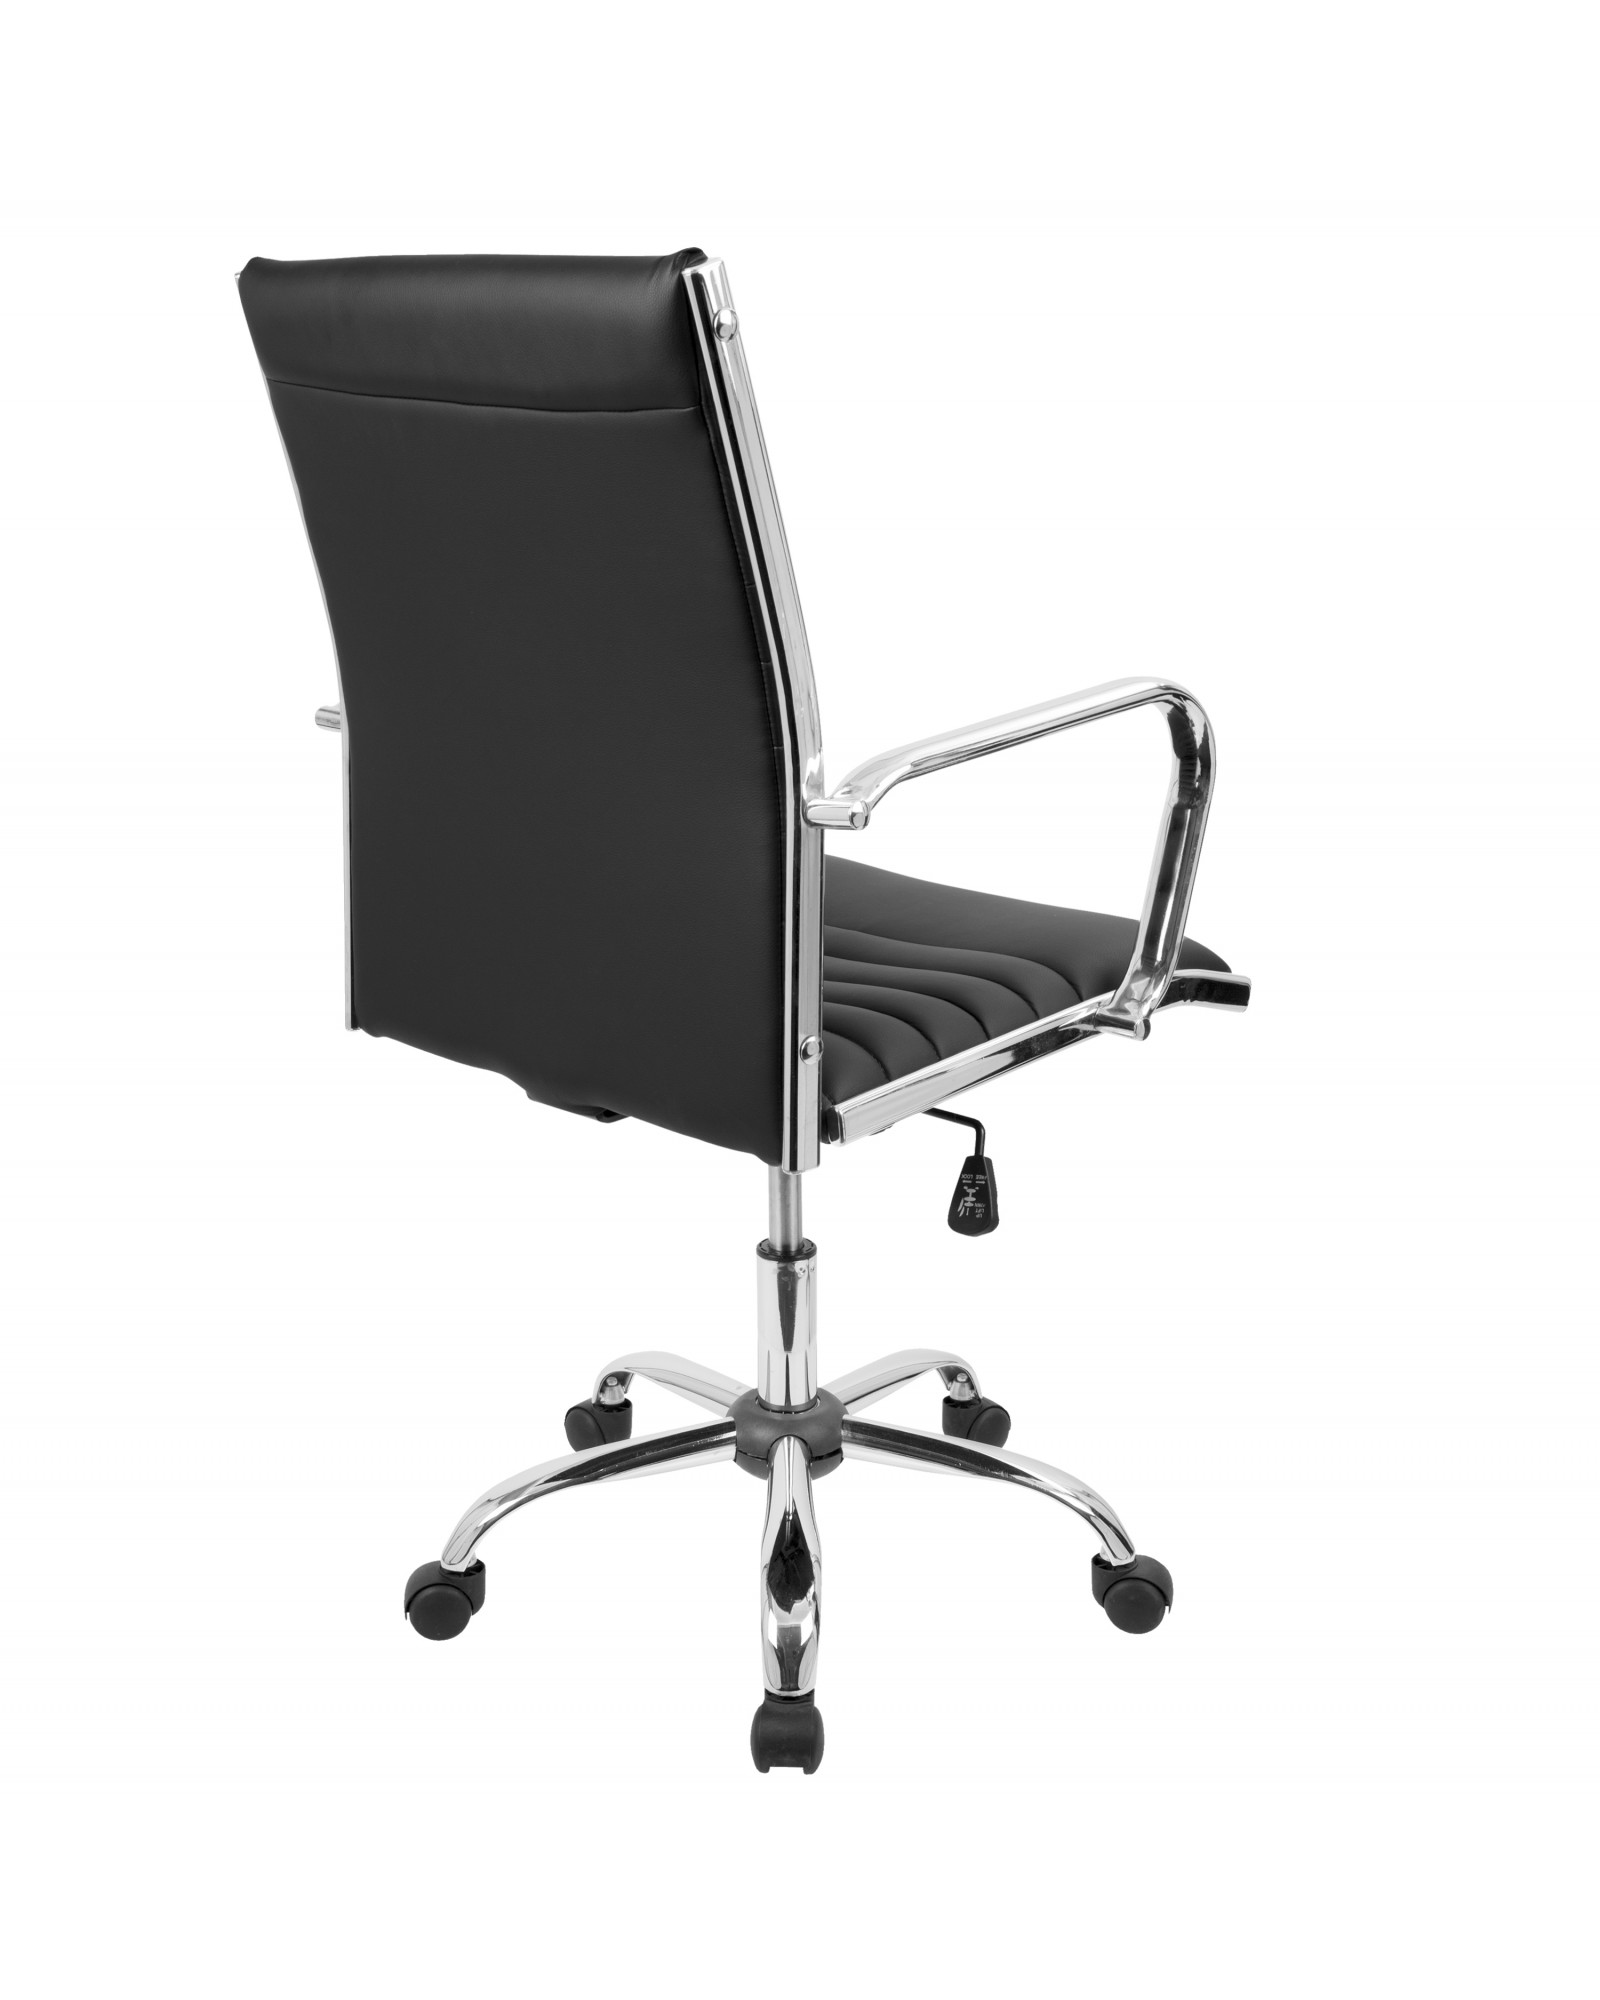 Master Contemporary Adjustable Office Chair with Swivel in Black Faux Leather